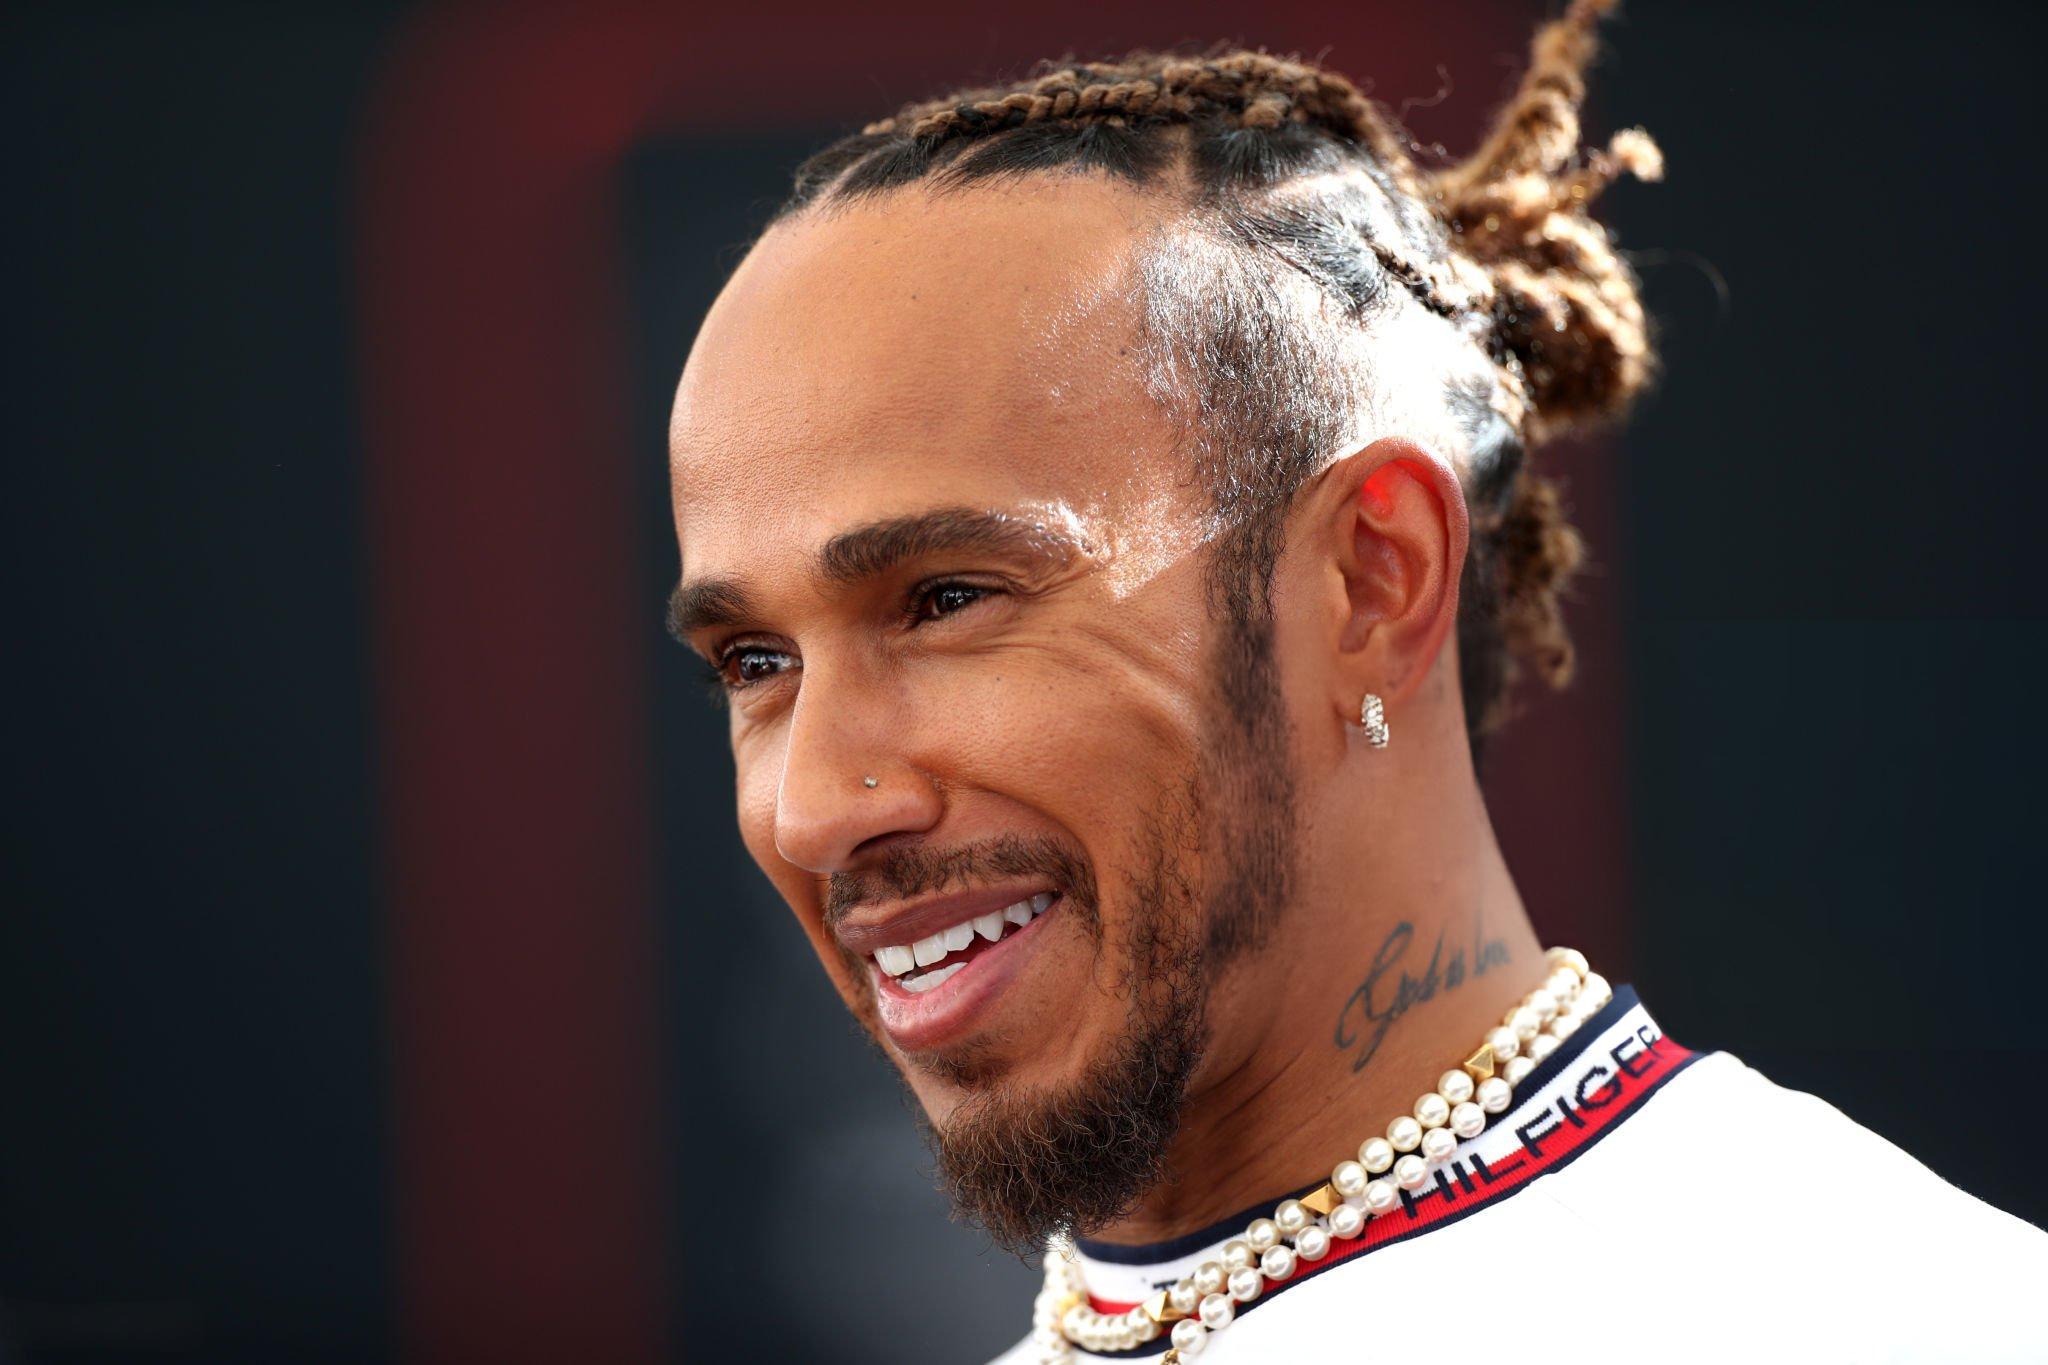 ABU DHABI, UNITED ARAB EMIRATES - NOVEMBER 23: Lewis Hamilton of Great Britain and Mercedes talks to the media in the Paddock during previews ahead of the F1 Grand Prix of Abu Dhabi at Yas Marina Circuit on November 23, 2023 in Abu Dhabi, United Arab Emirates. (Photo by Peter Fox | Getty Images)